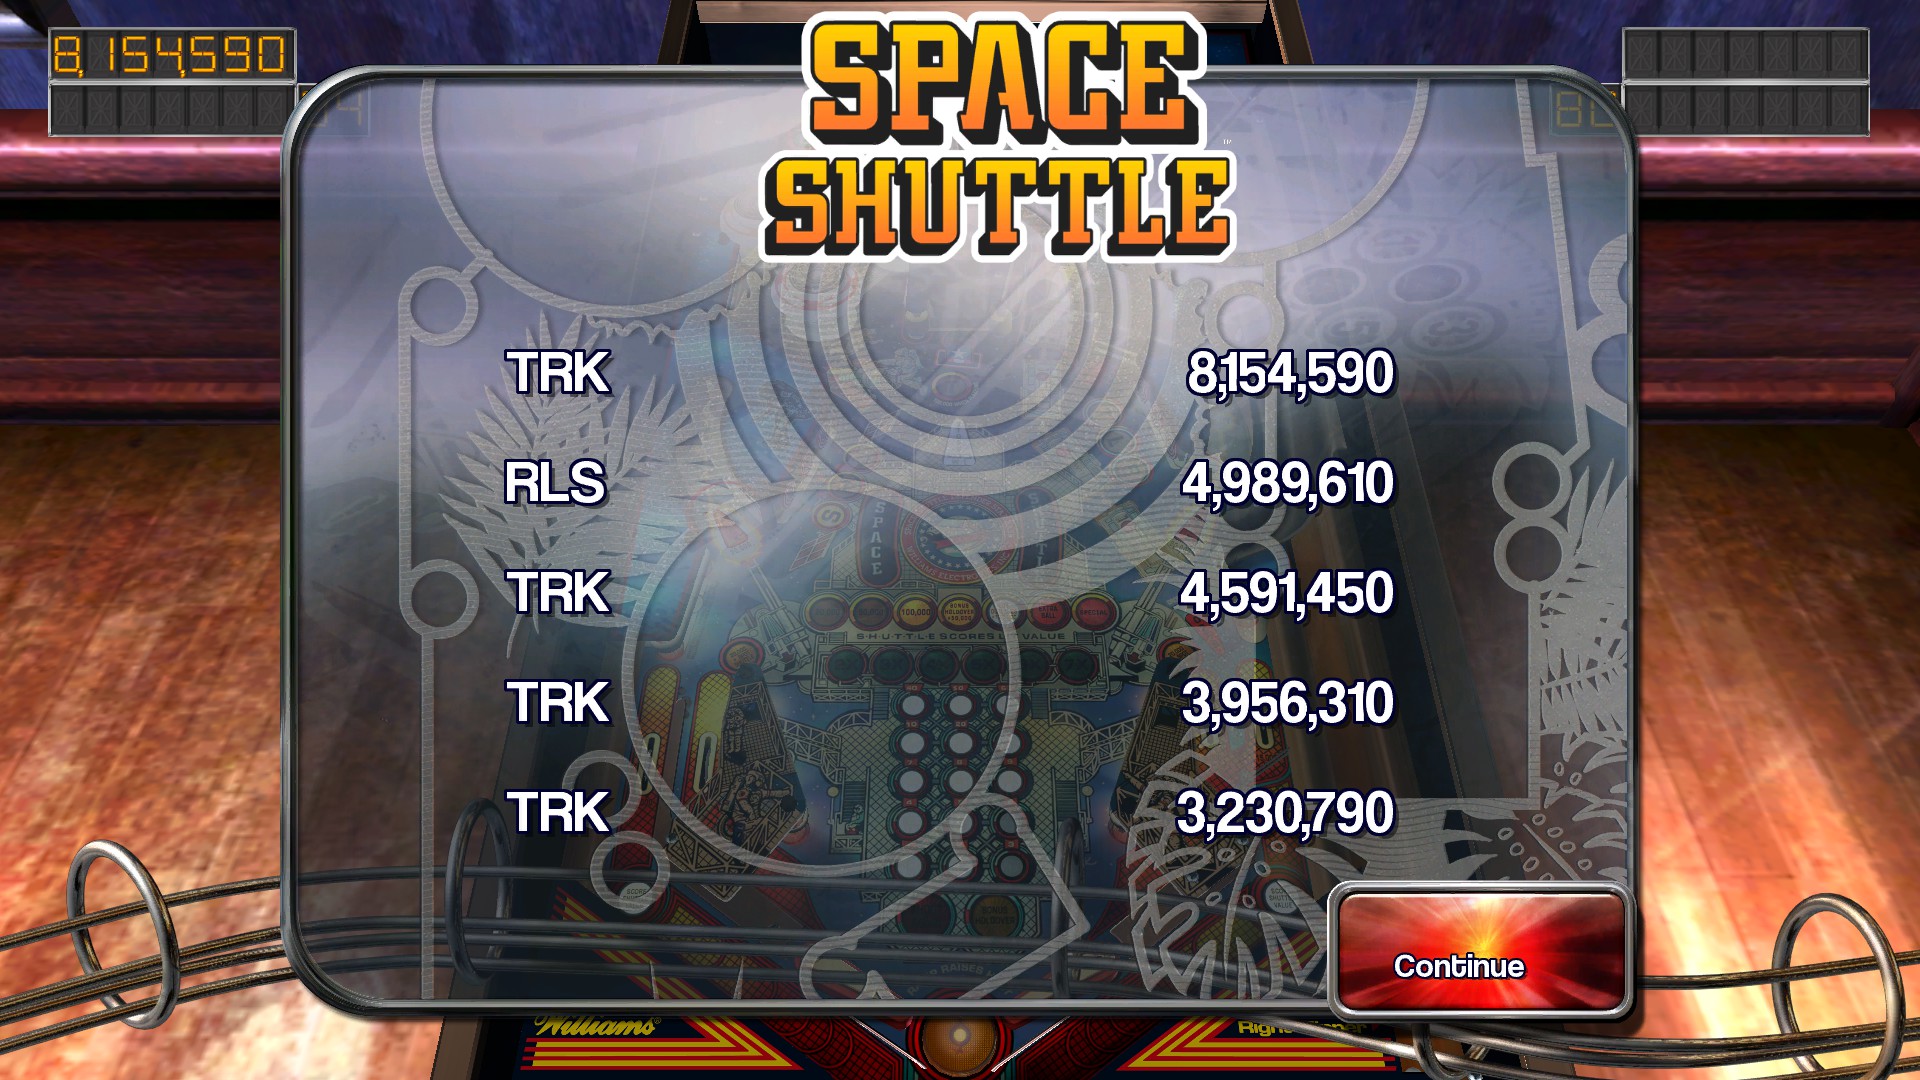 TheTrickster: Pinball Arcade: Space Shuttle (PC) 8,154,590 points on 2016-02-27 05:54:58